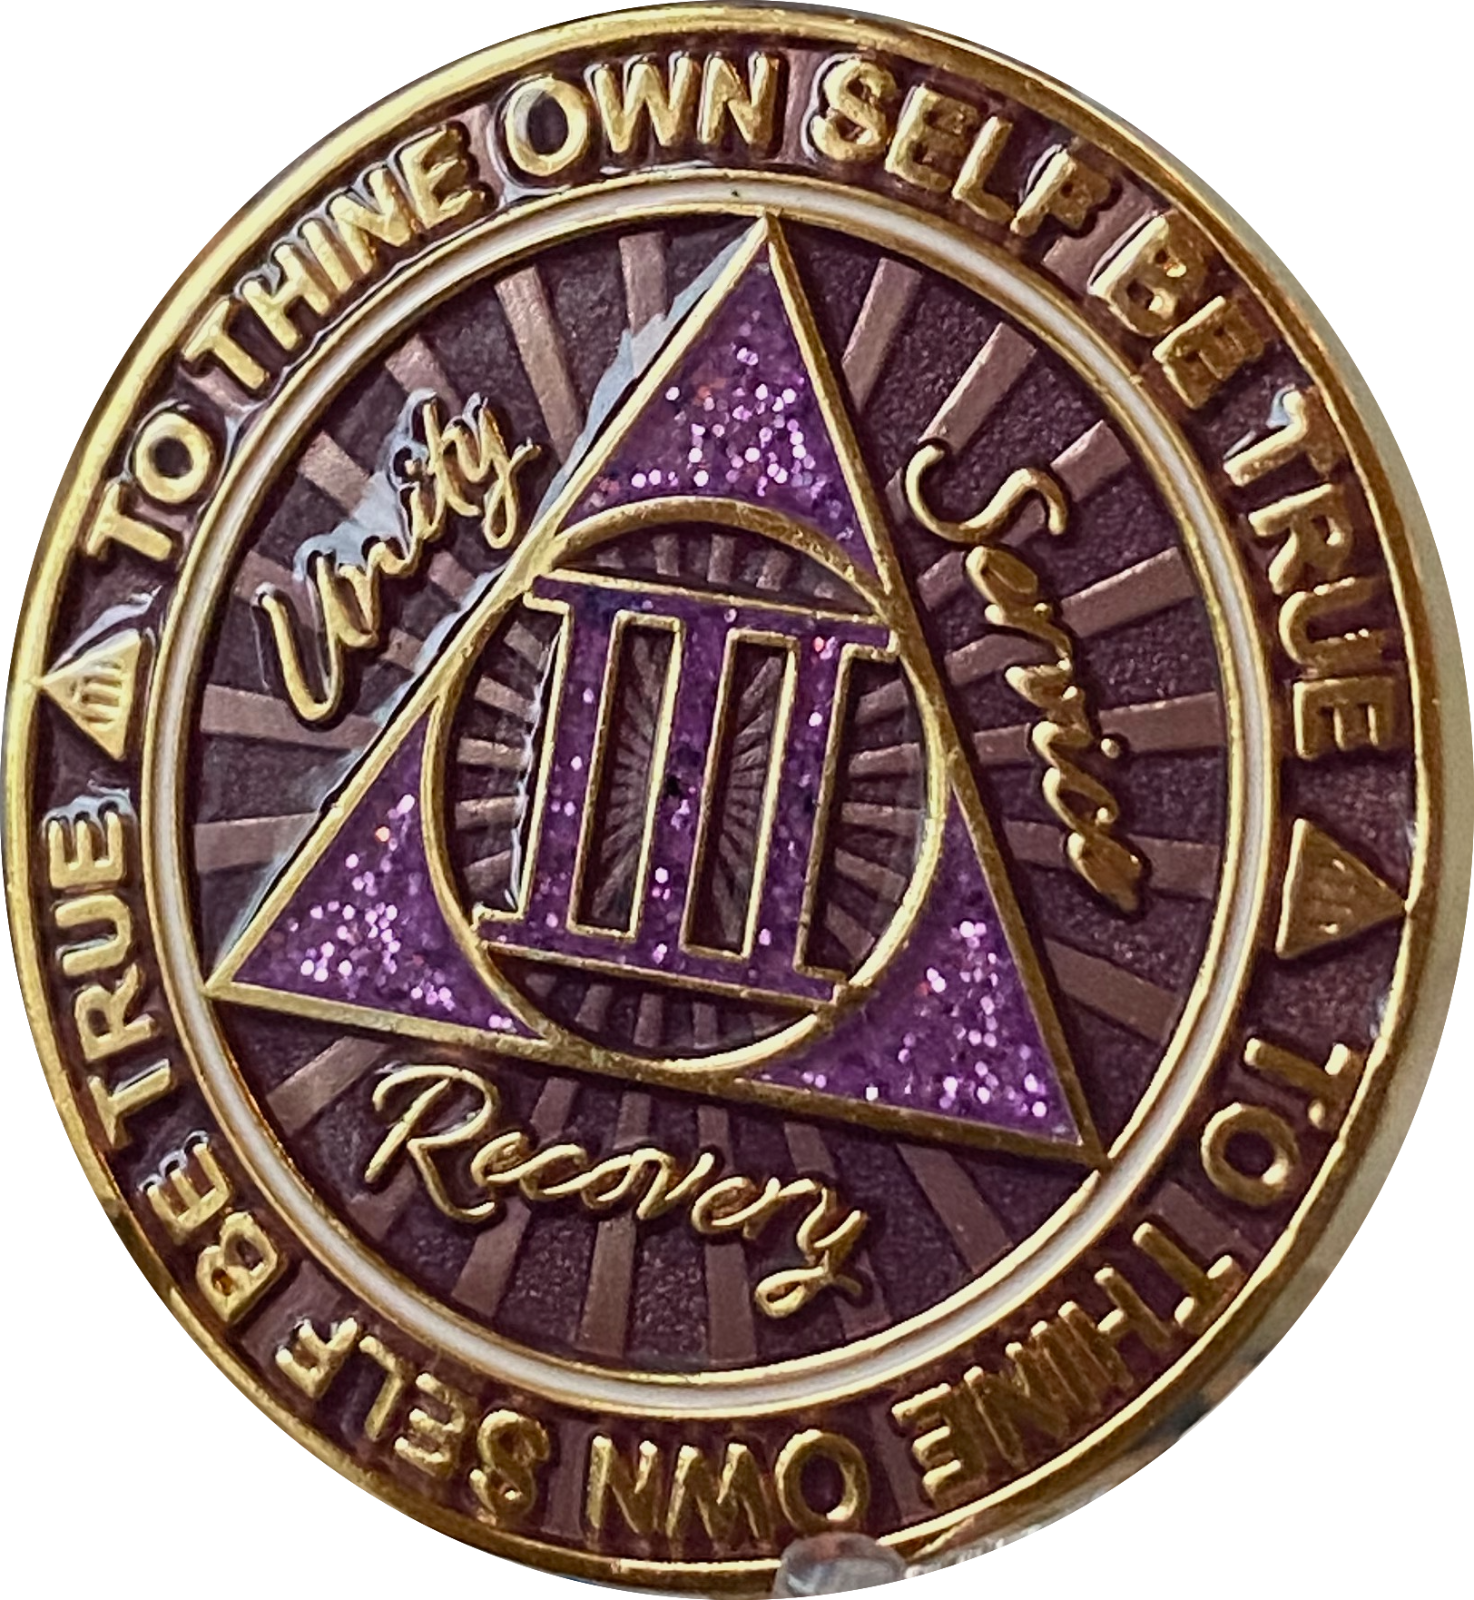 3 Year AA Medallion Cosmic Purple Glitter Alcoholics Anonymous Sobriety Chip